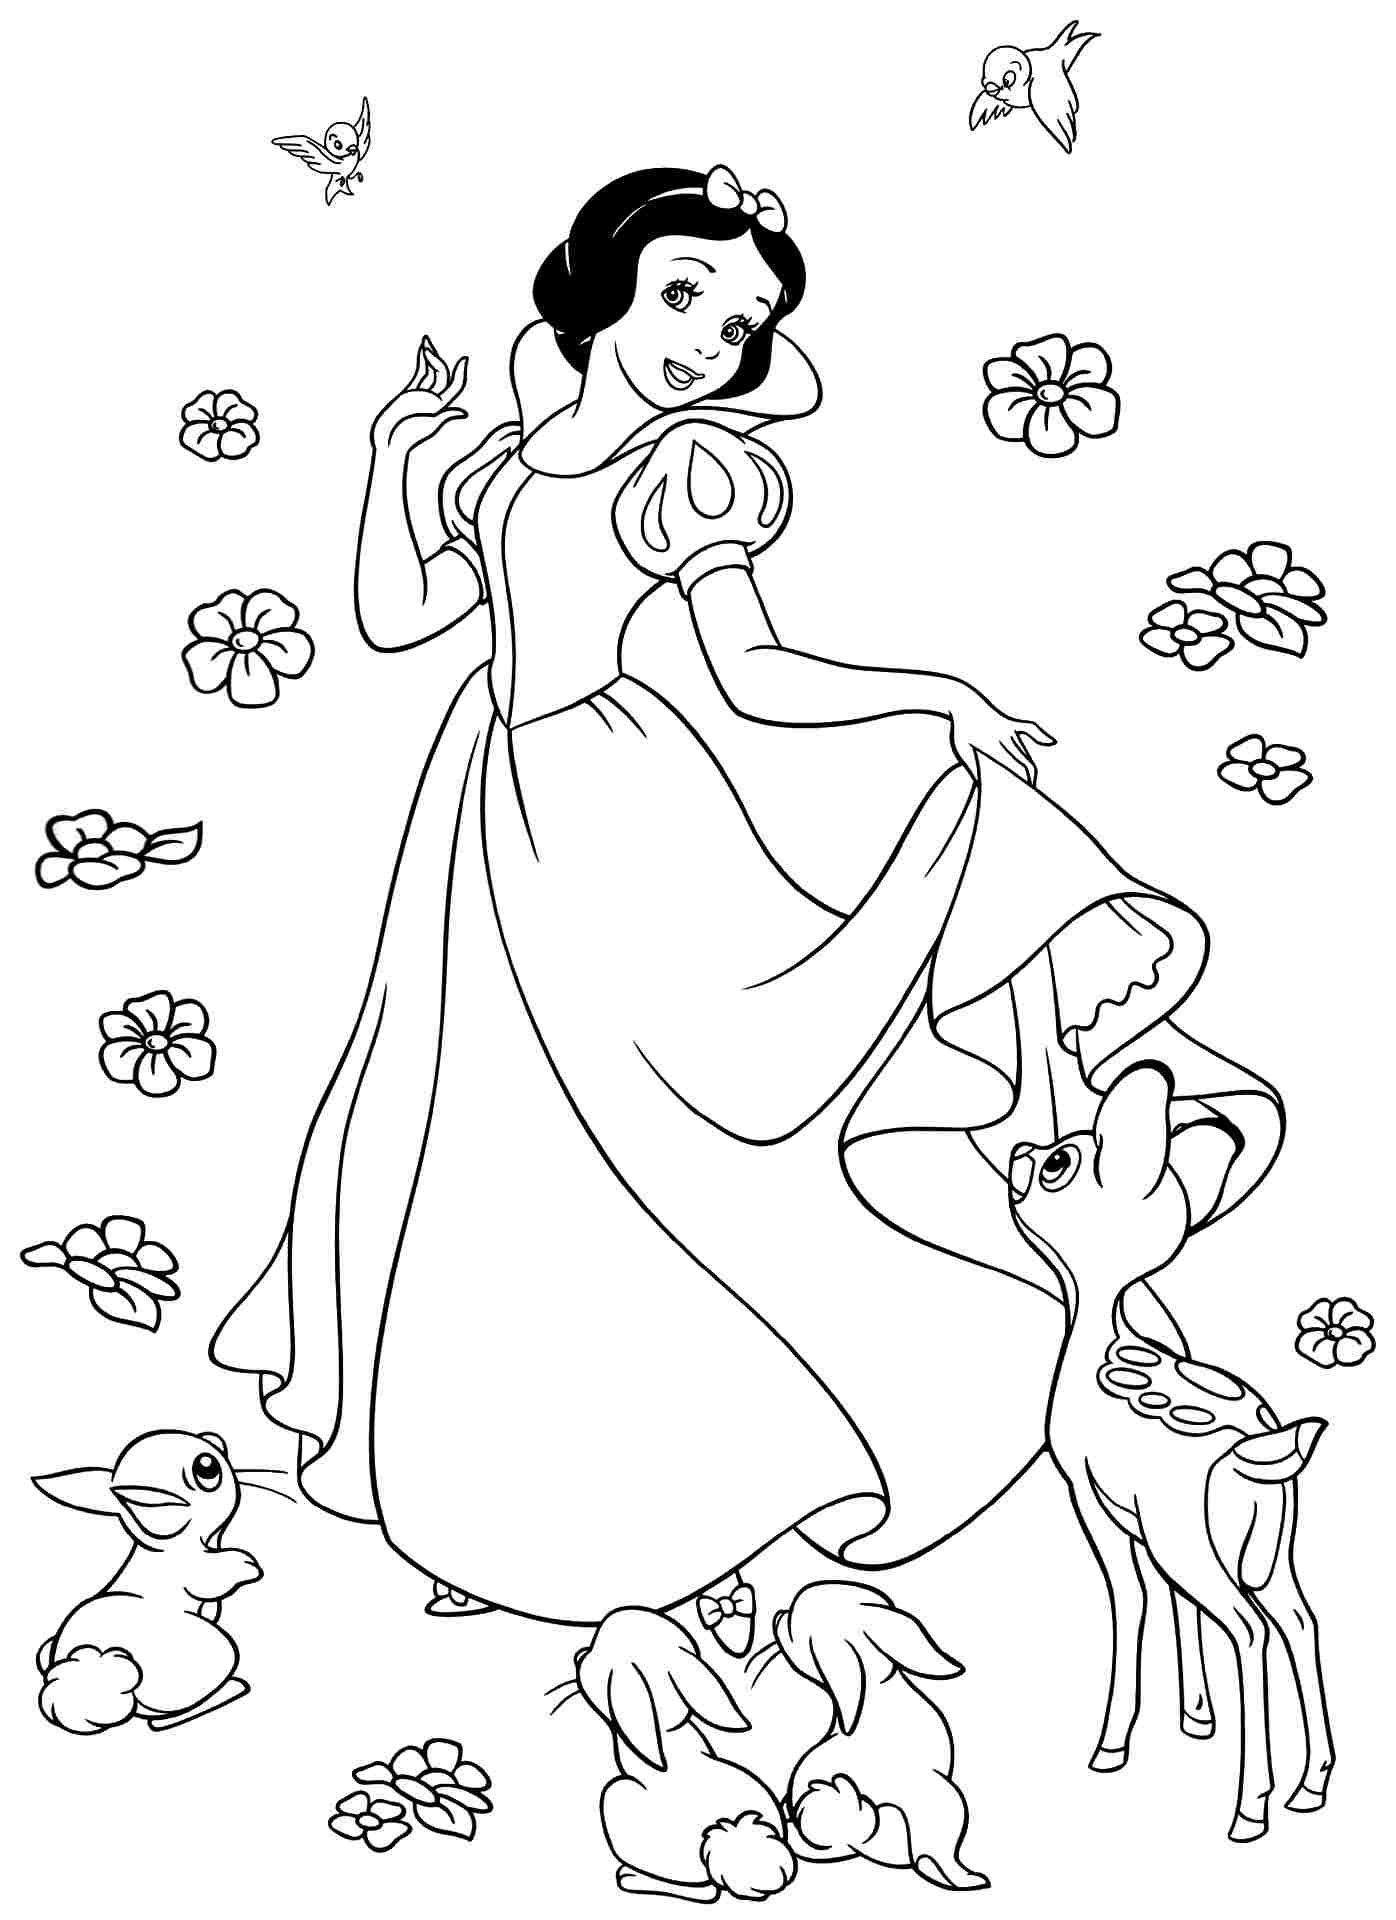 Free 11+ Snow White Coloring Pages Disney for Girls and Boys - 123 Kids Fun Apps